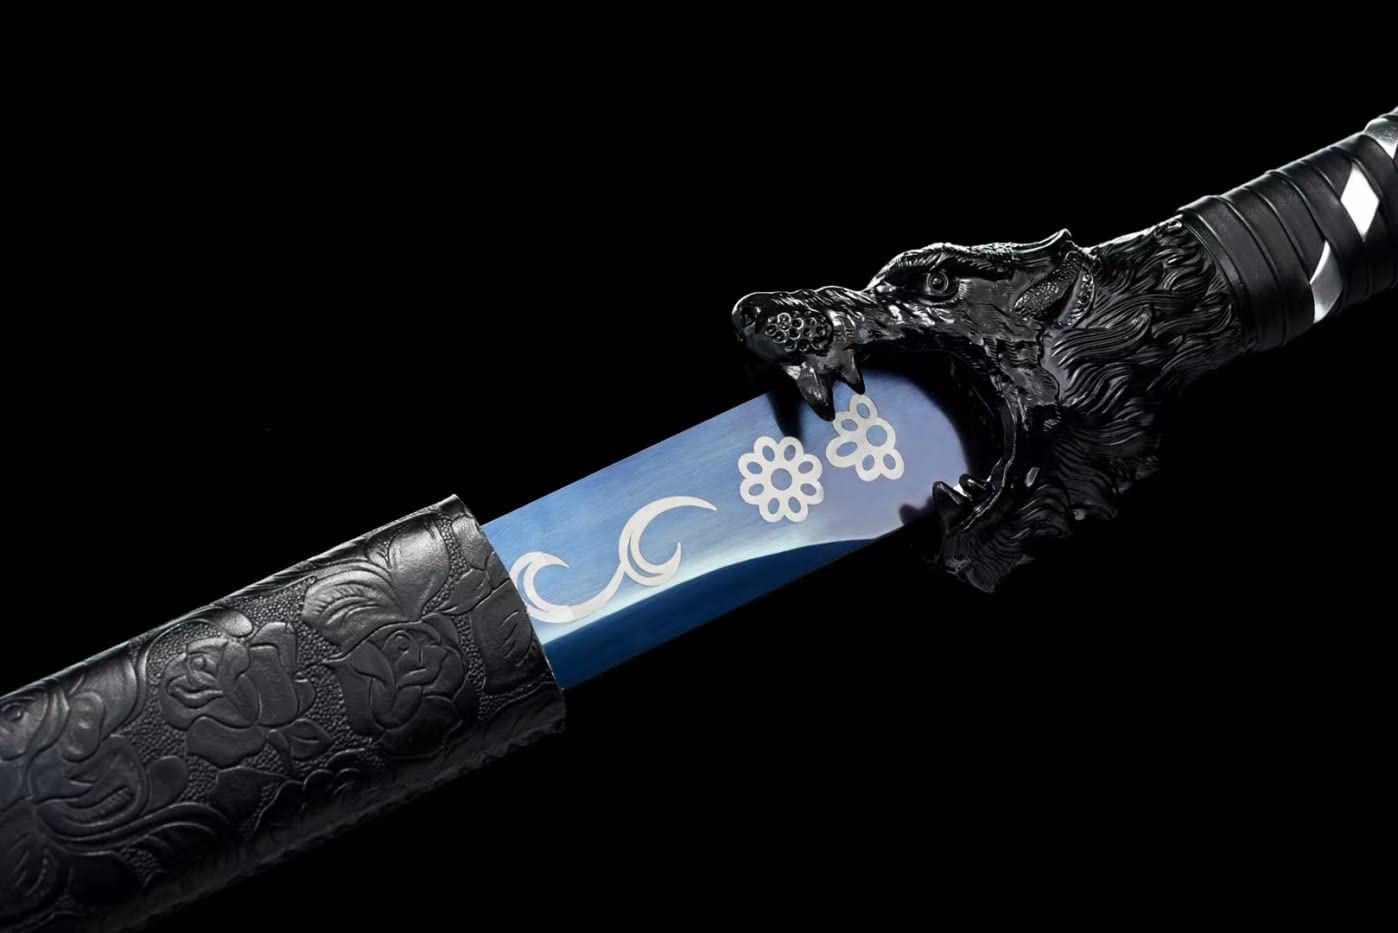 Dragon Tang jian,Forged High Carbon Steel Etched Blade,Fake Leather Scabbard,Chinese swords